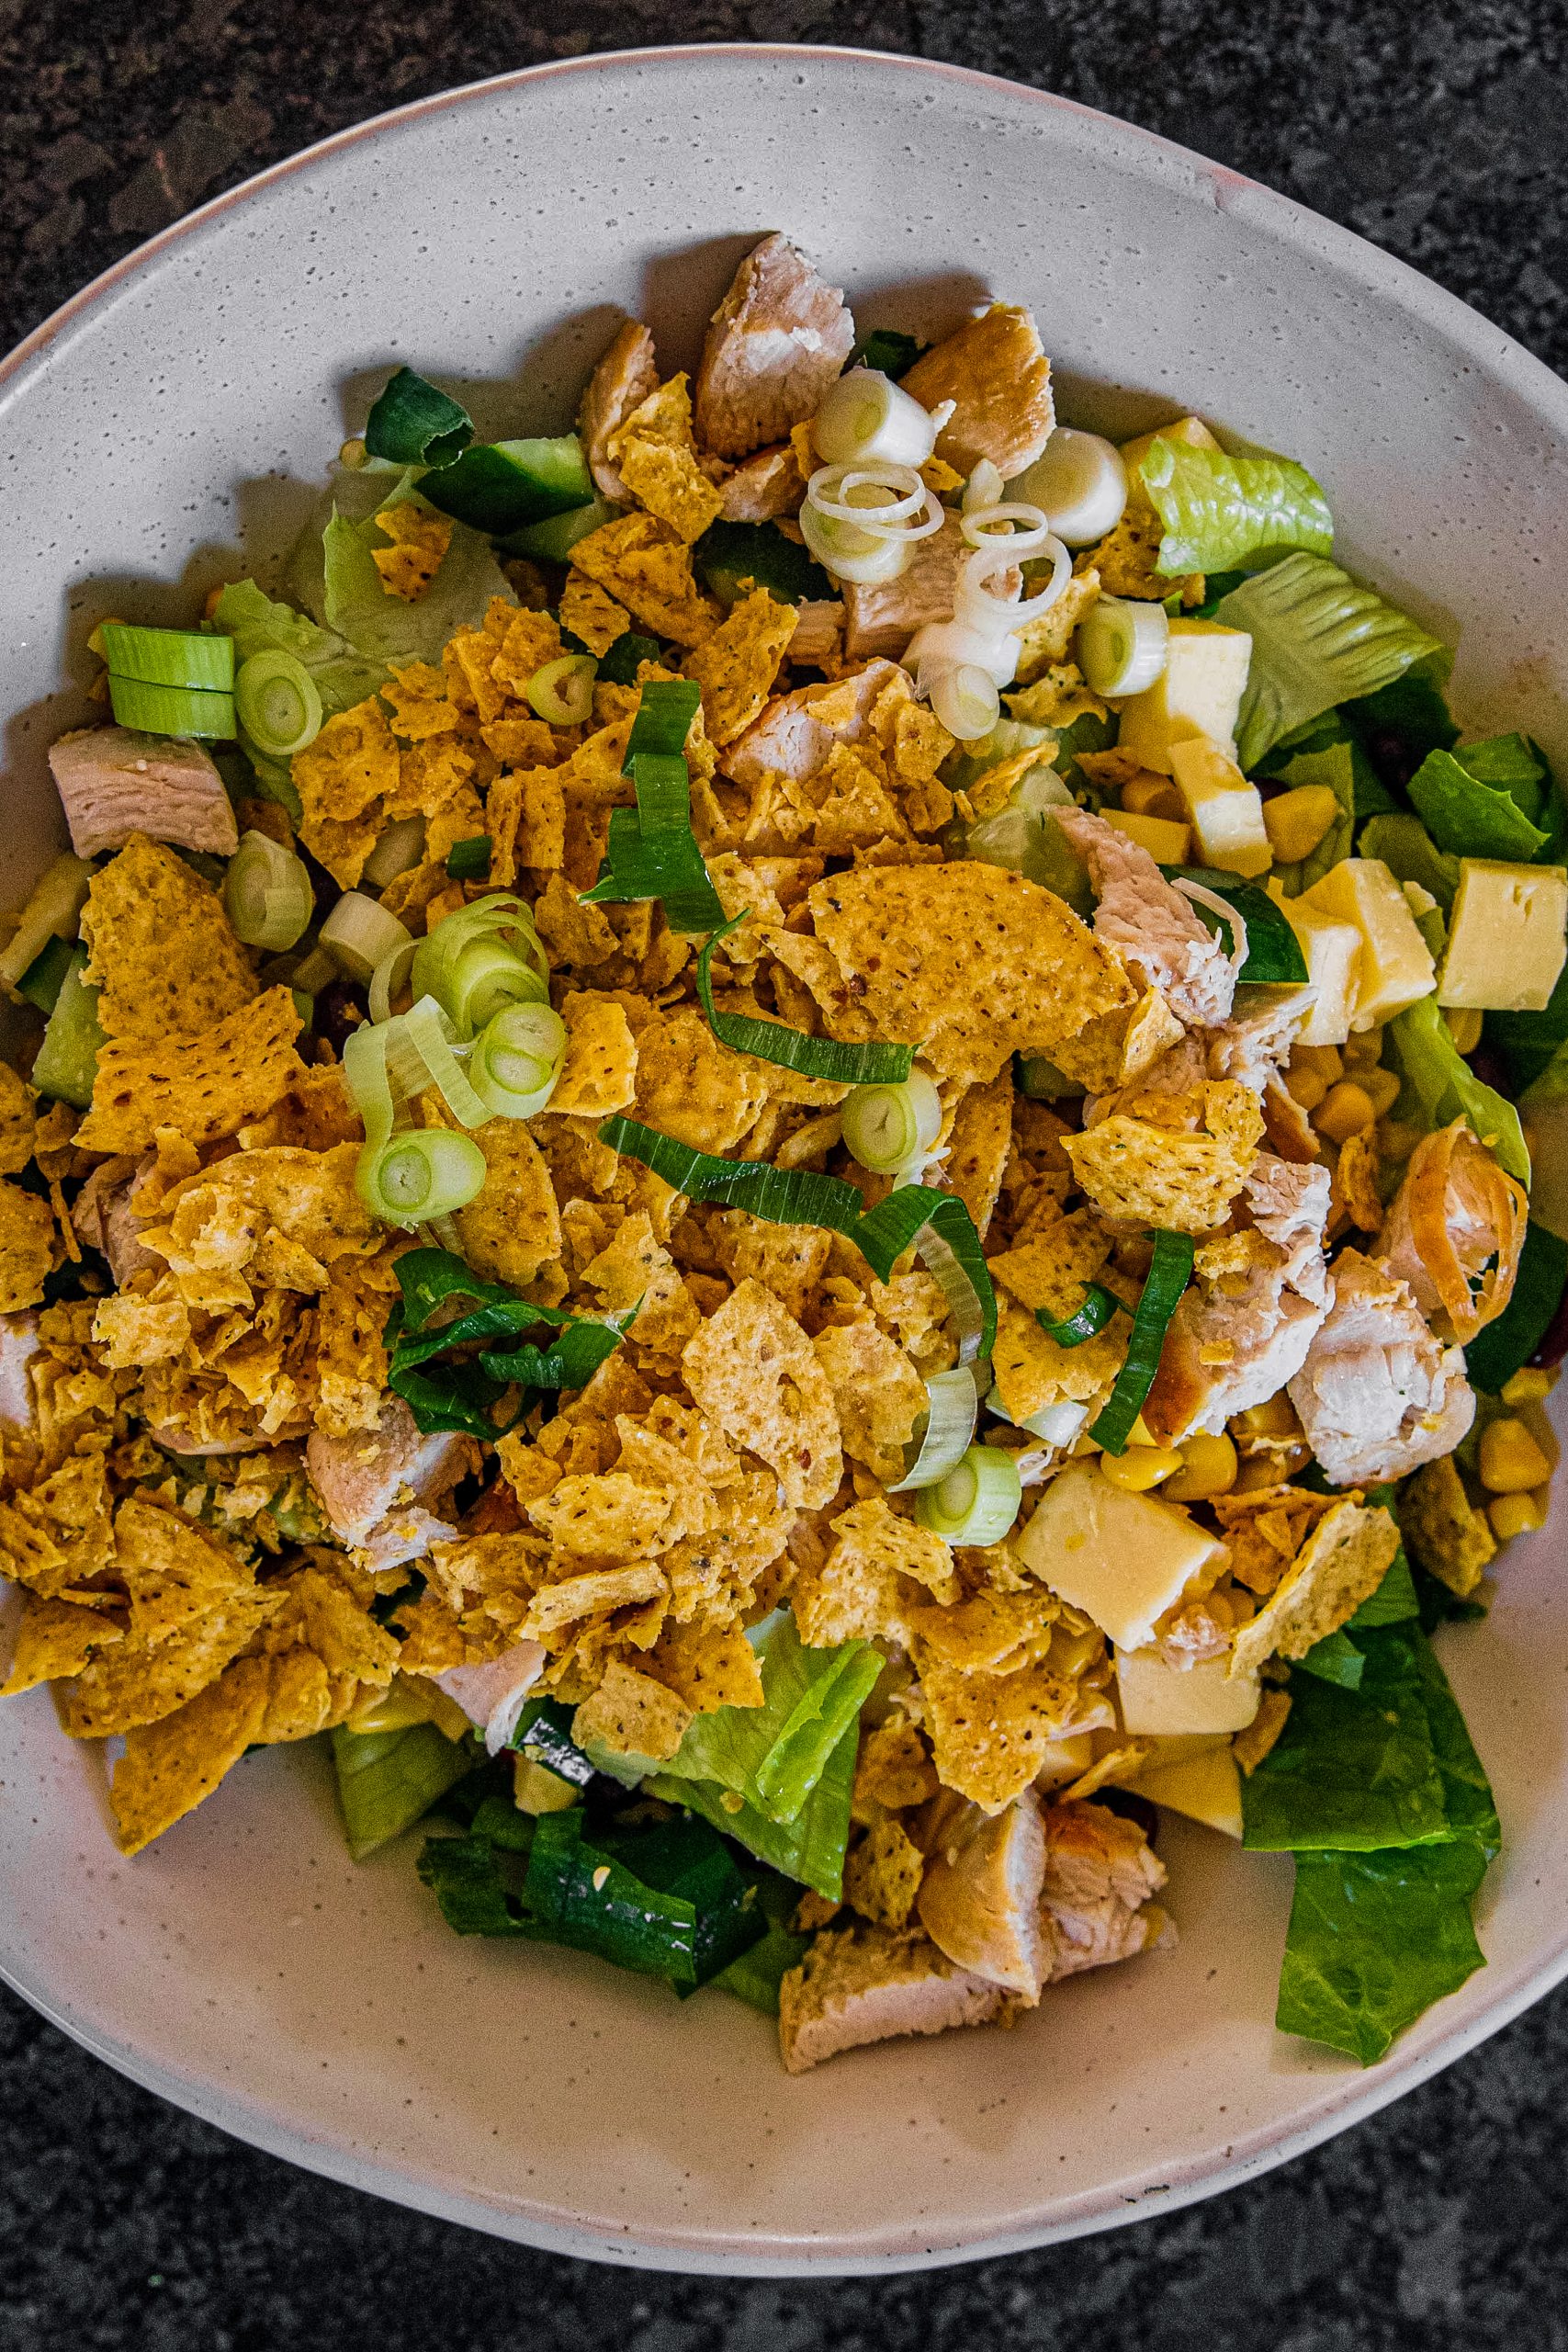  In a large bowl, add the ingredients for the salad and mix carefully. Gradually, add the dressing and mix until it’s coated. 